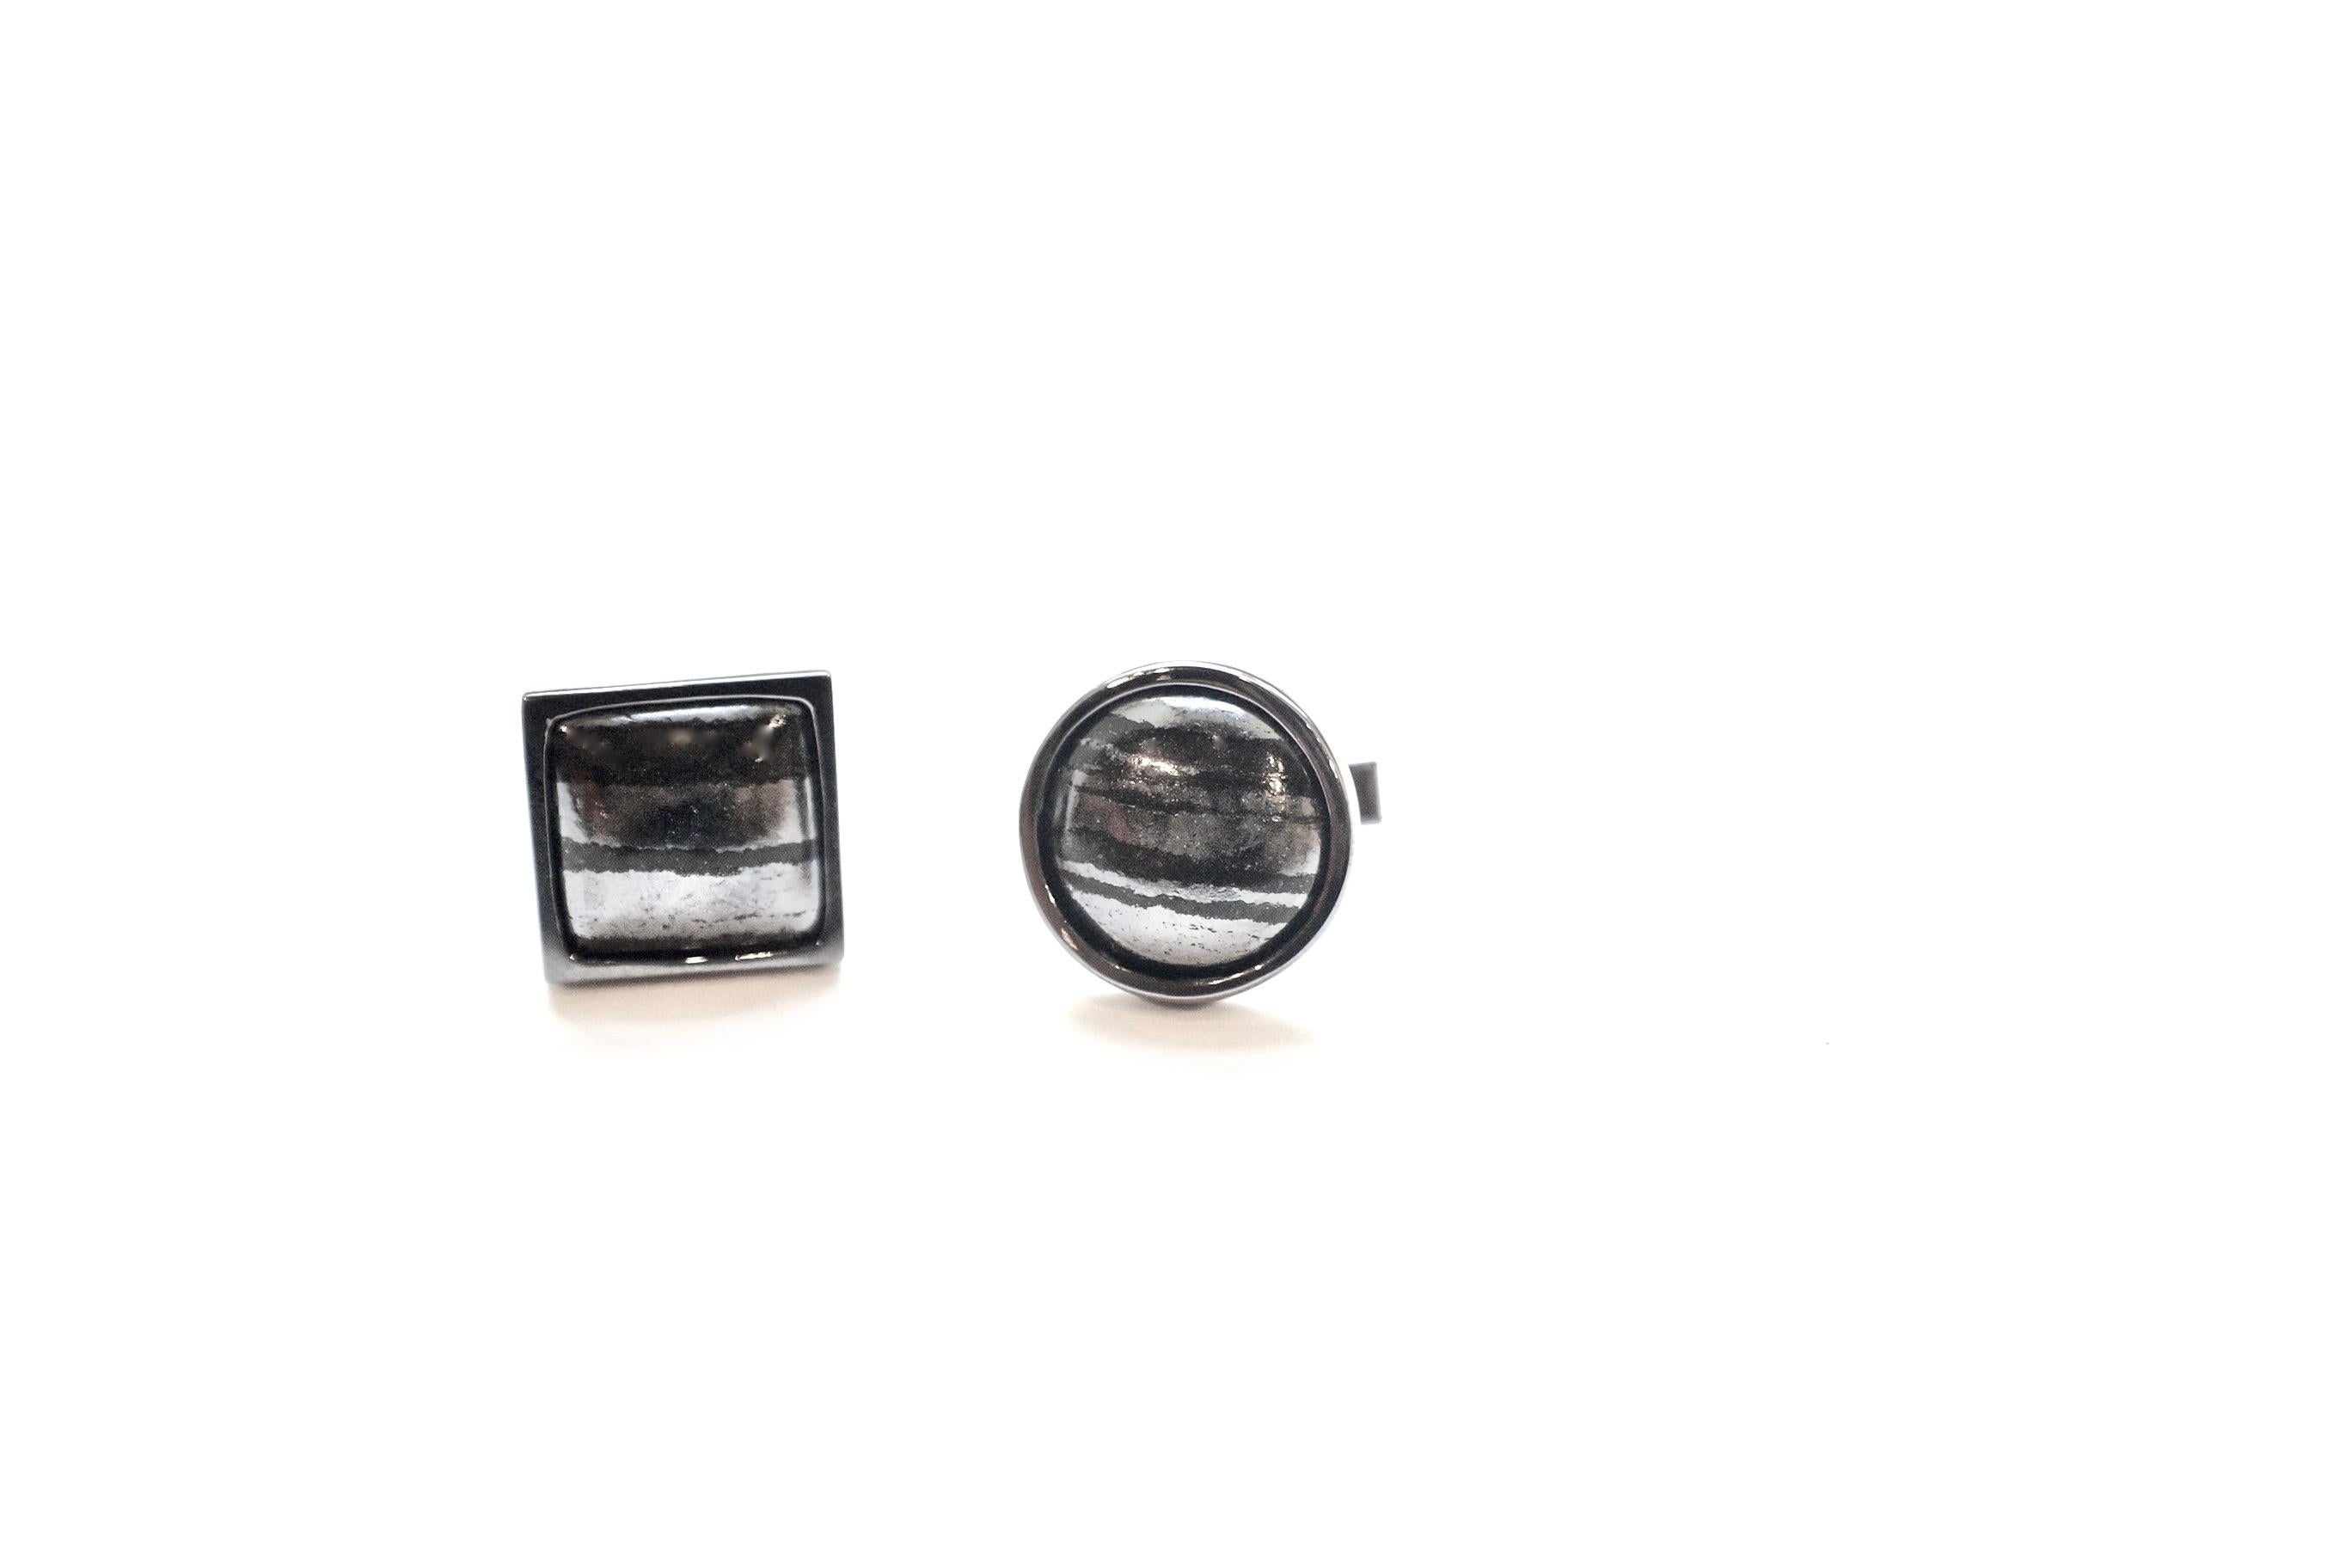 Swedish Slag Cufflinks
A pair of eighteen-karat blackened white gold cufflinks, each set with a Swedish slag cabochon, one round, and the other square. 
Swedish Slag Total Weight – 43.54 cts.
This piece, in its entirety, has been created and